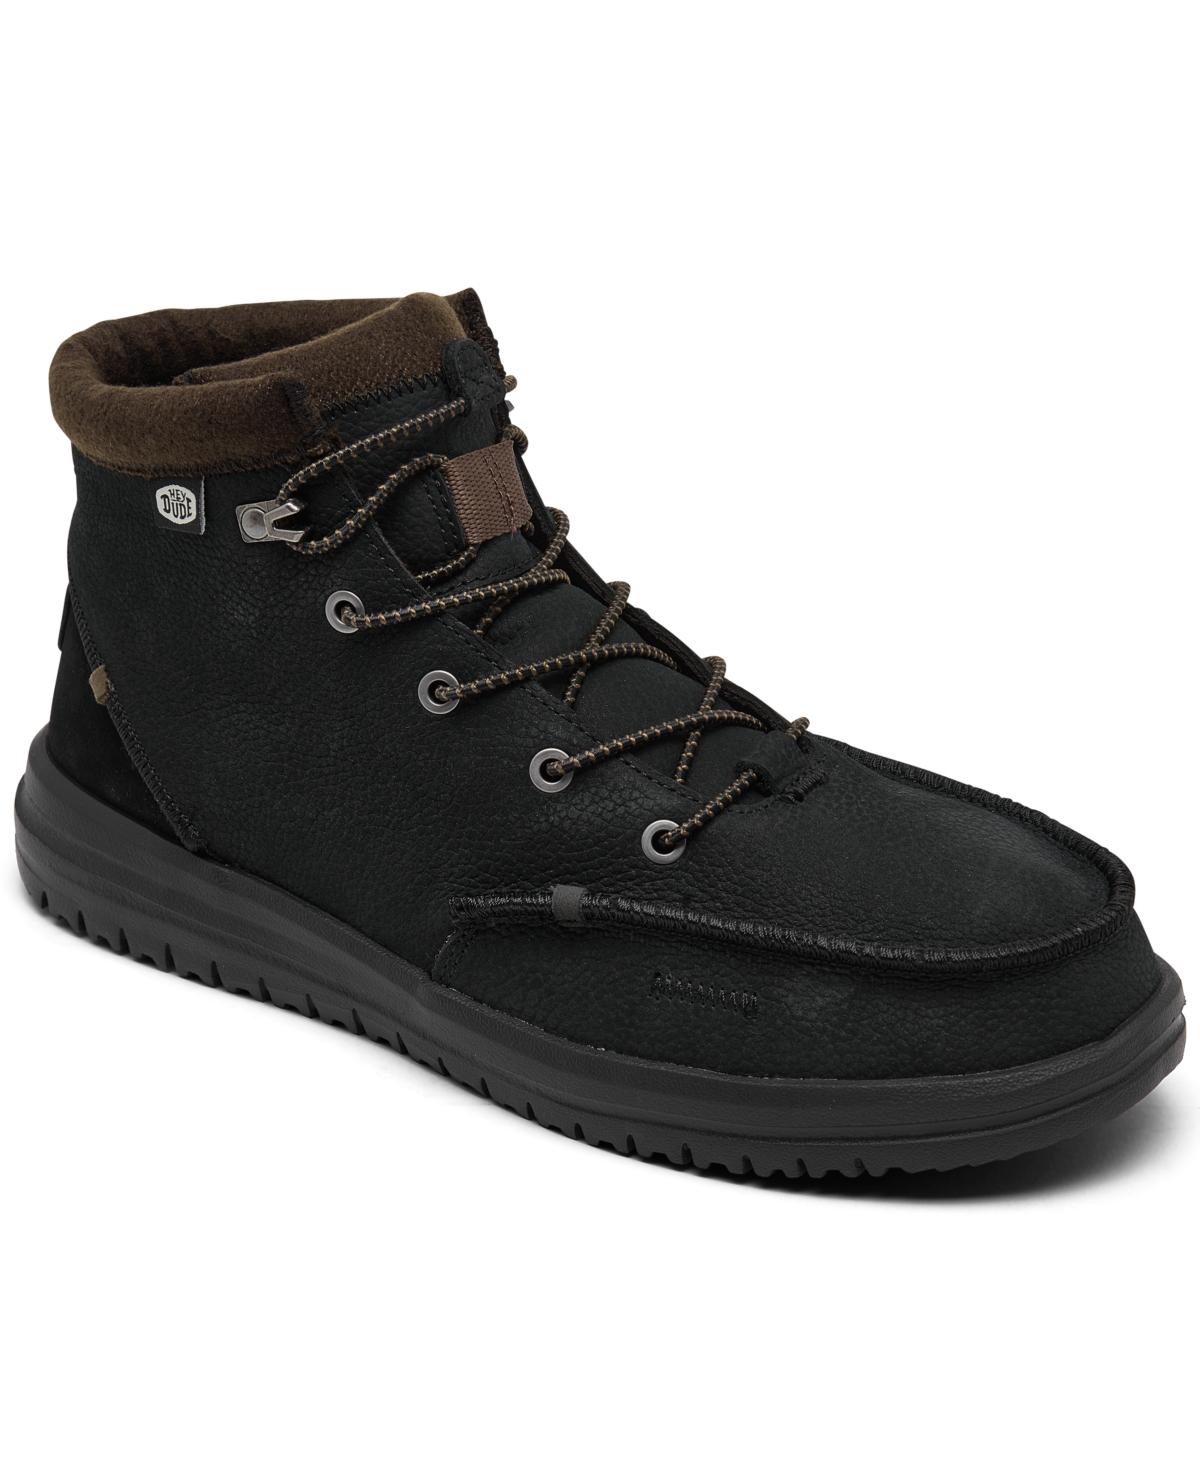 Men's Bradley Leather Casual Boots from Finish Line - Black